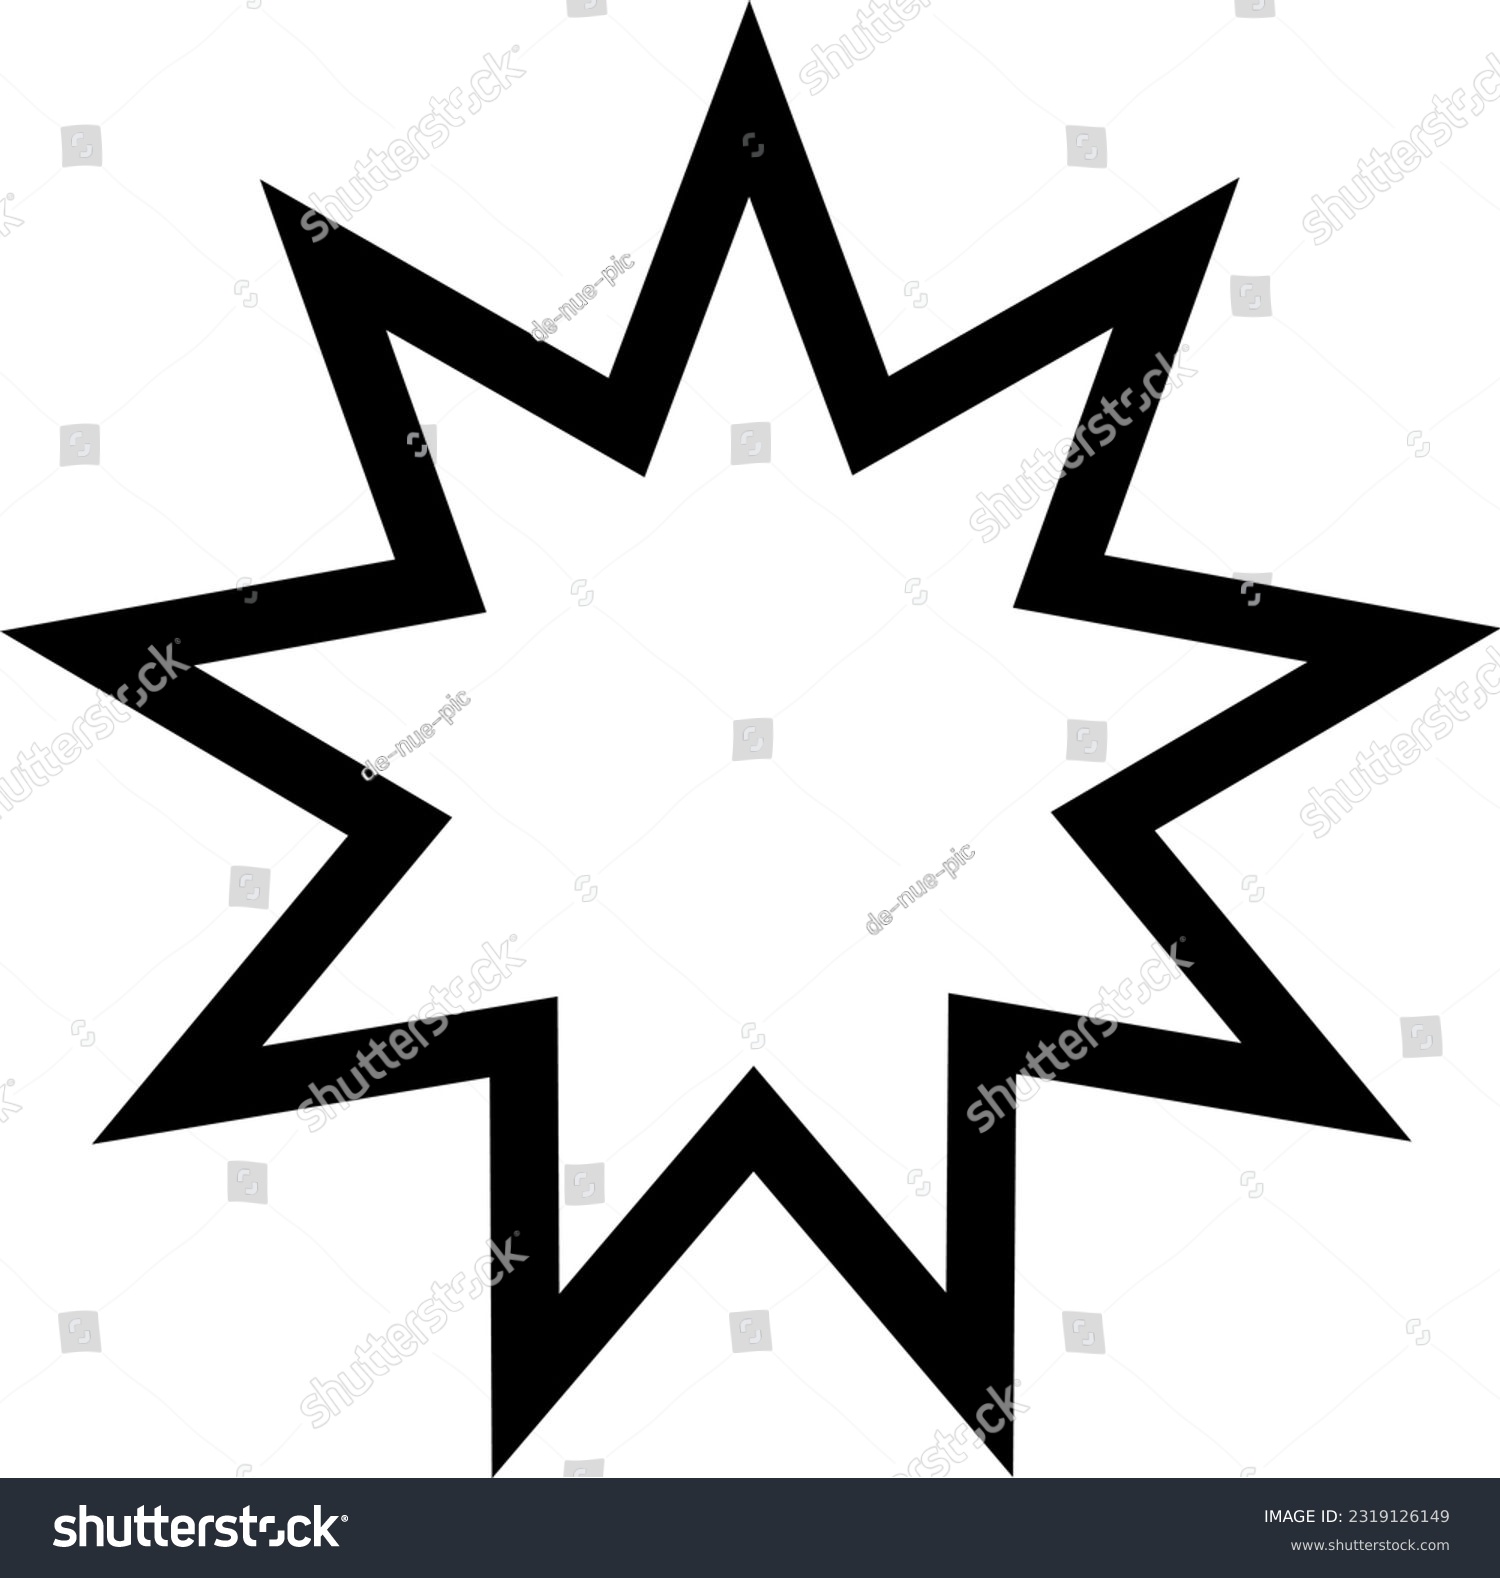 SVG of Baháʼí, Nine-pointed star, According to the Abjad system of Isopsephy, the word Bahá' has a numerical equivalence of 9, and thus there is frequent use of the number 9 in Baháʼí symbols. svg